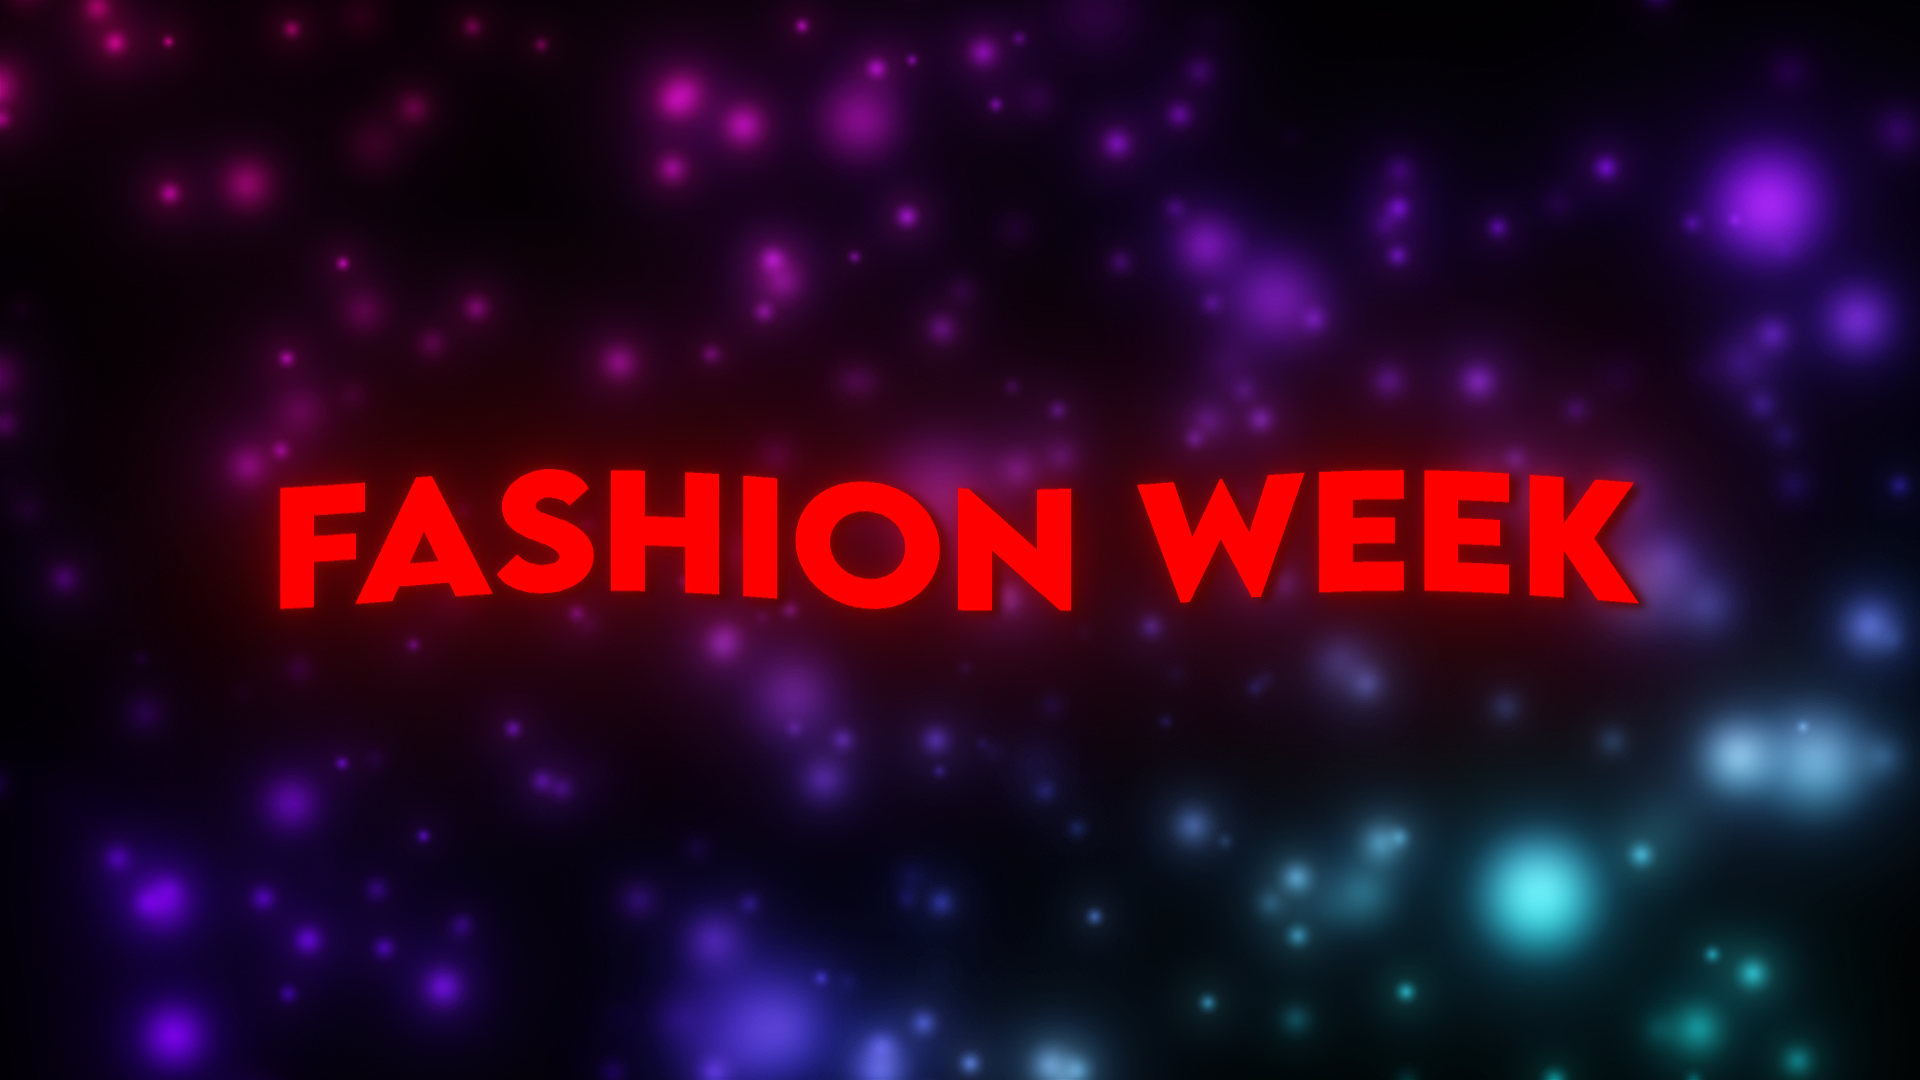 Intro Text Song: Fashion Week